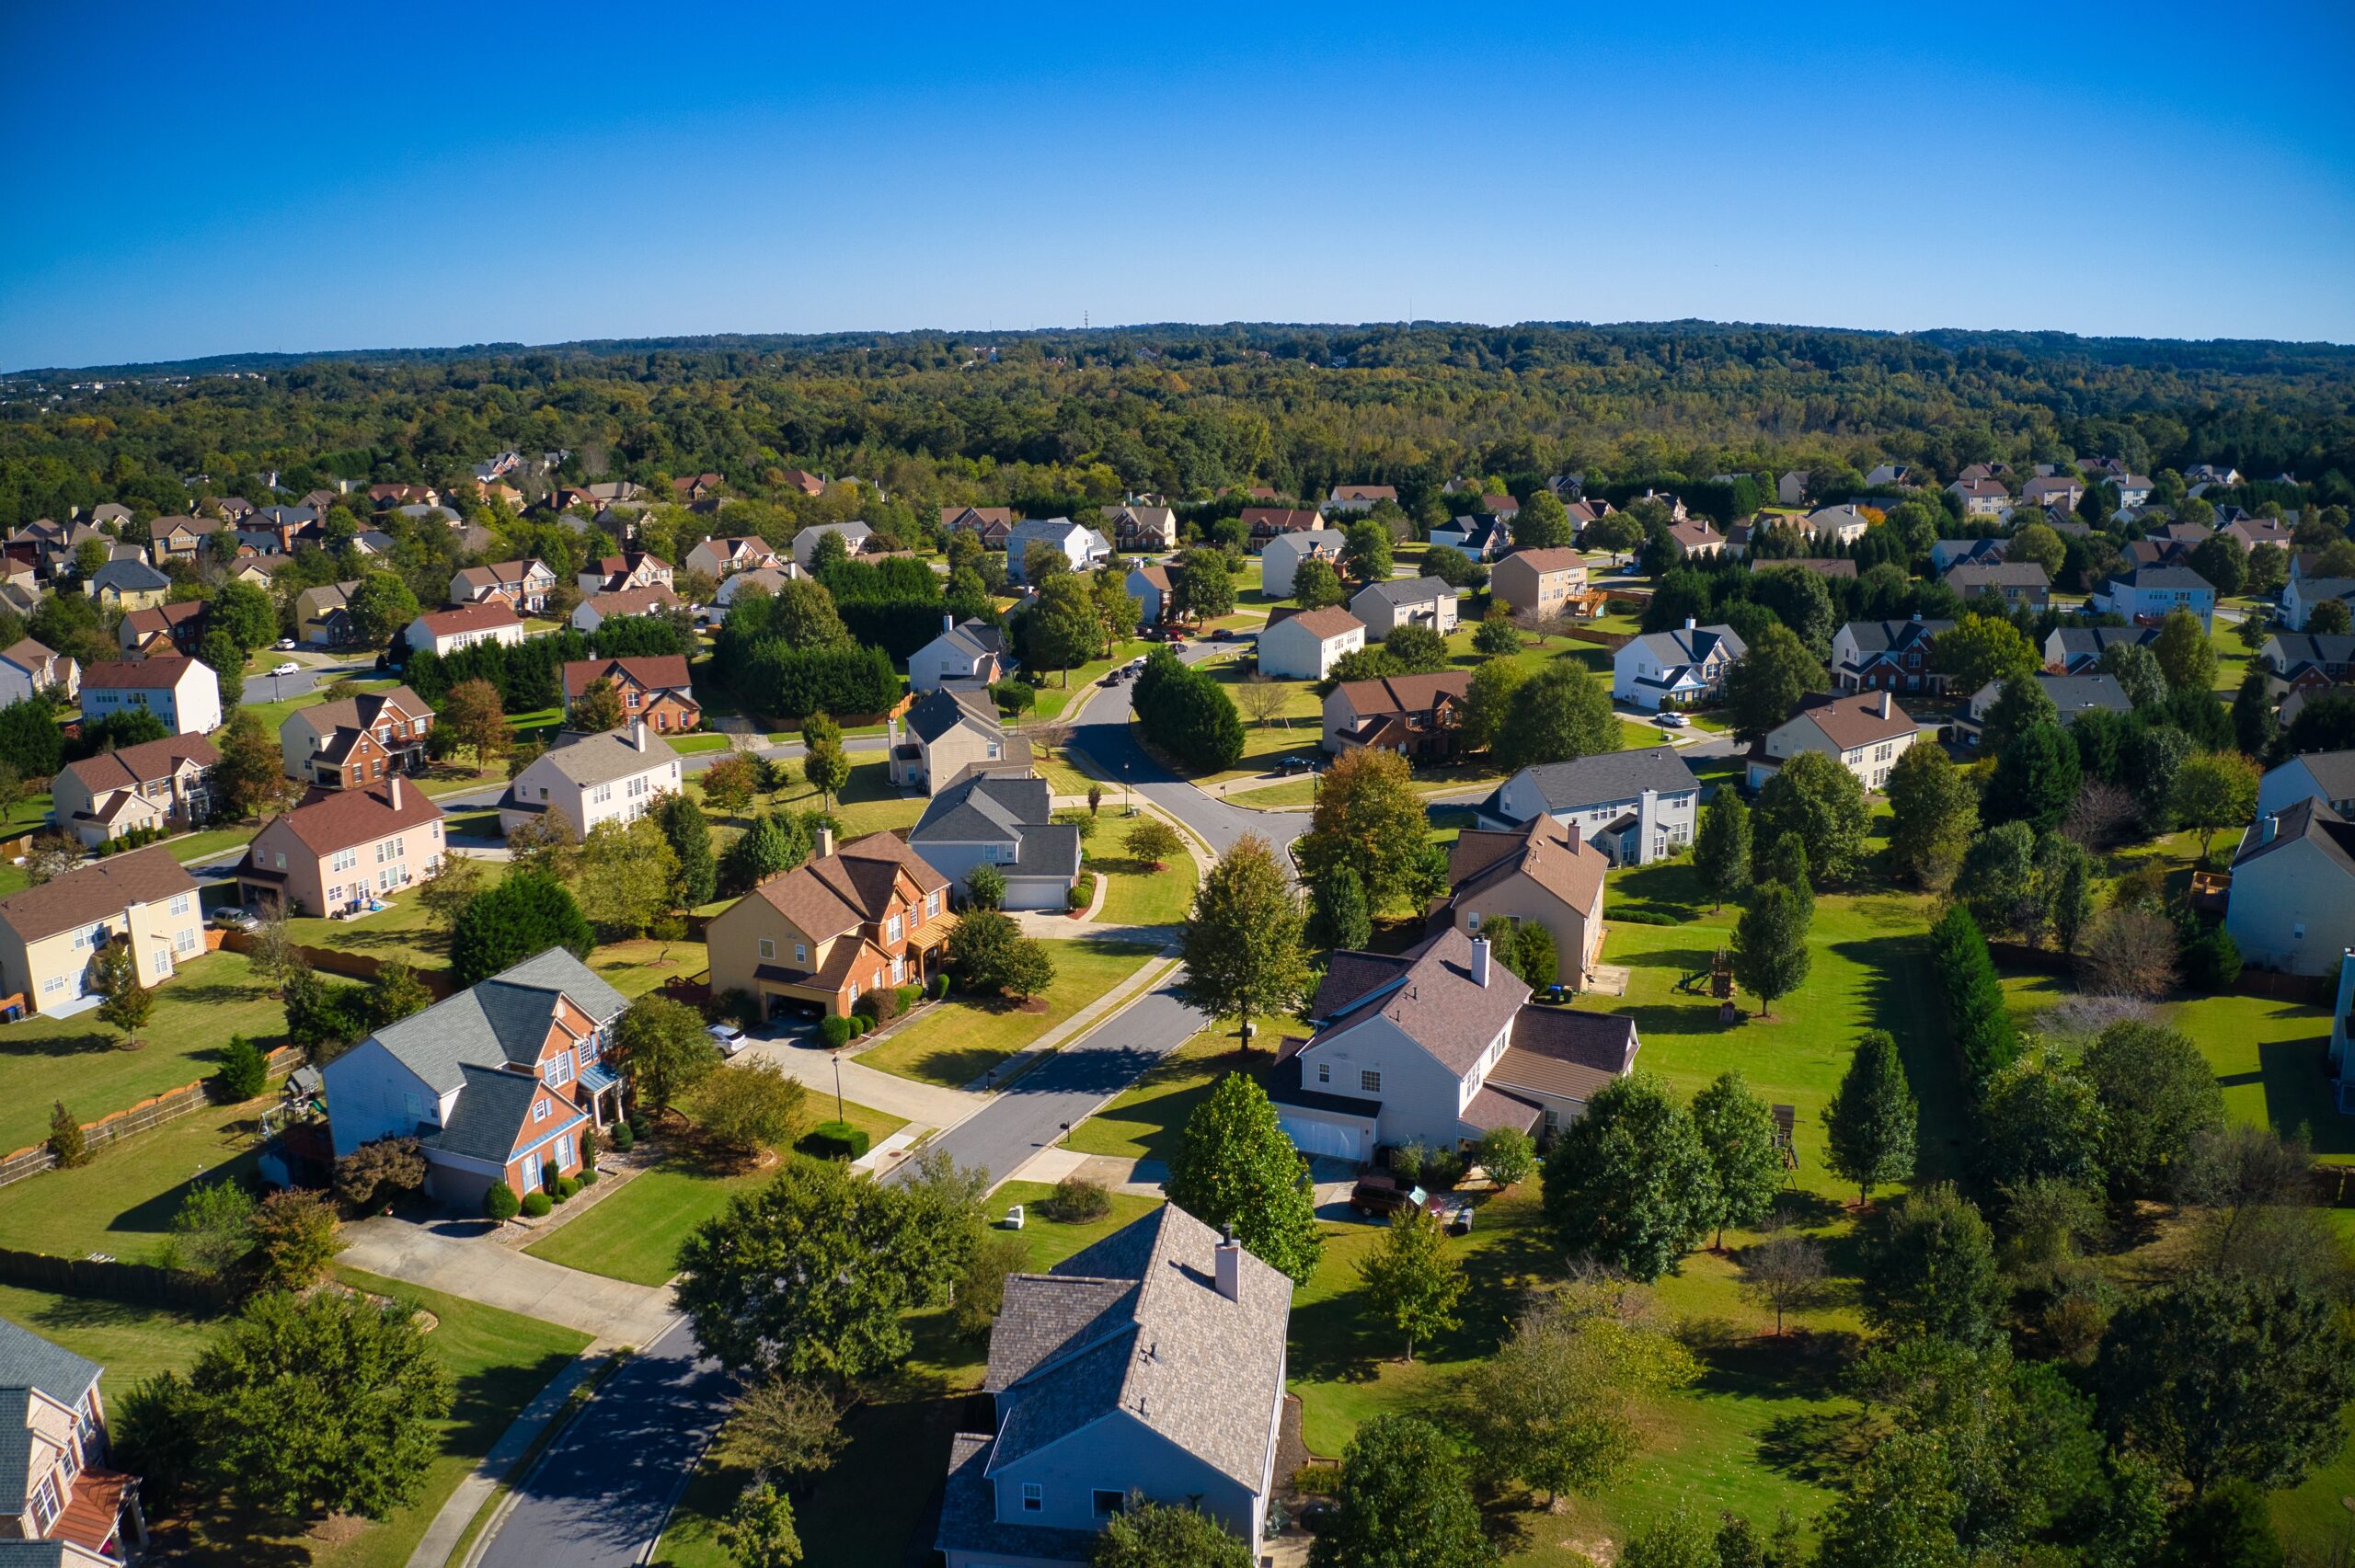 Shot using a drone during the golden hour shows an upscale suburbs with golf course, lake, houses and roof tops